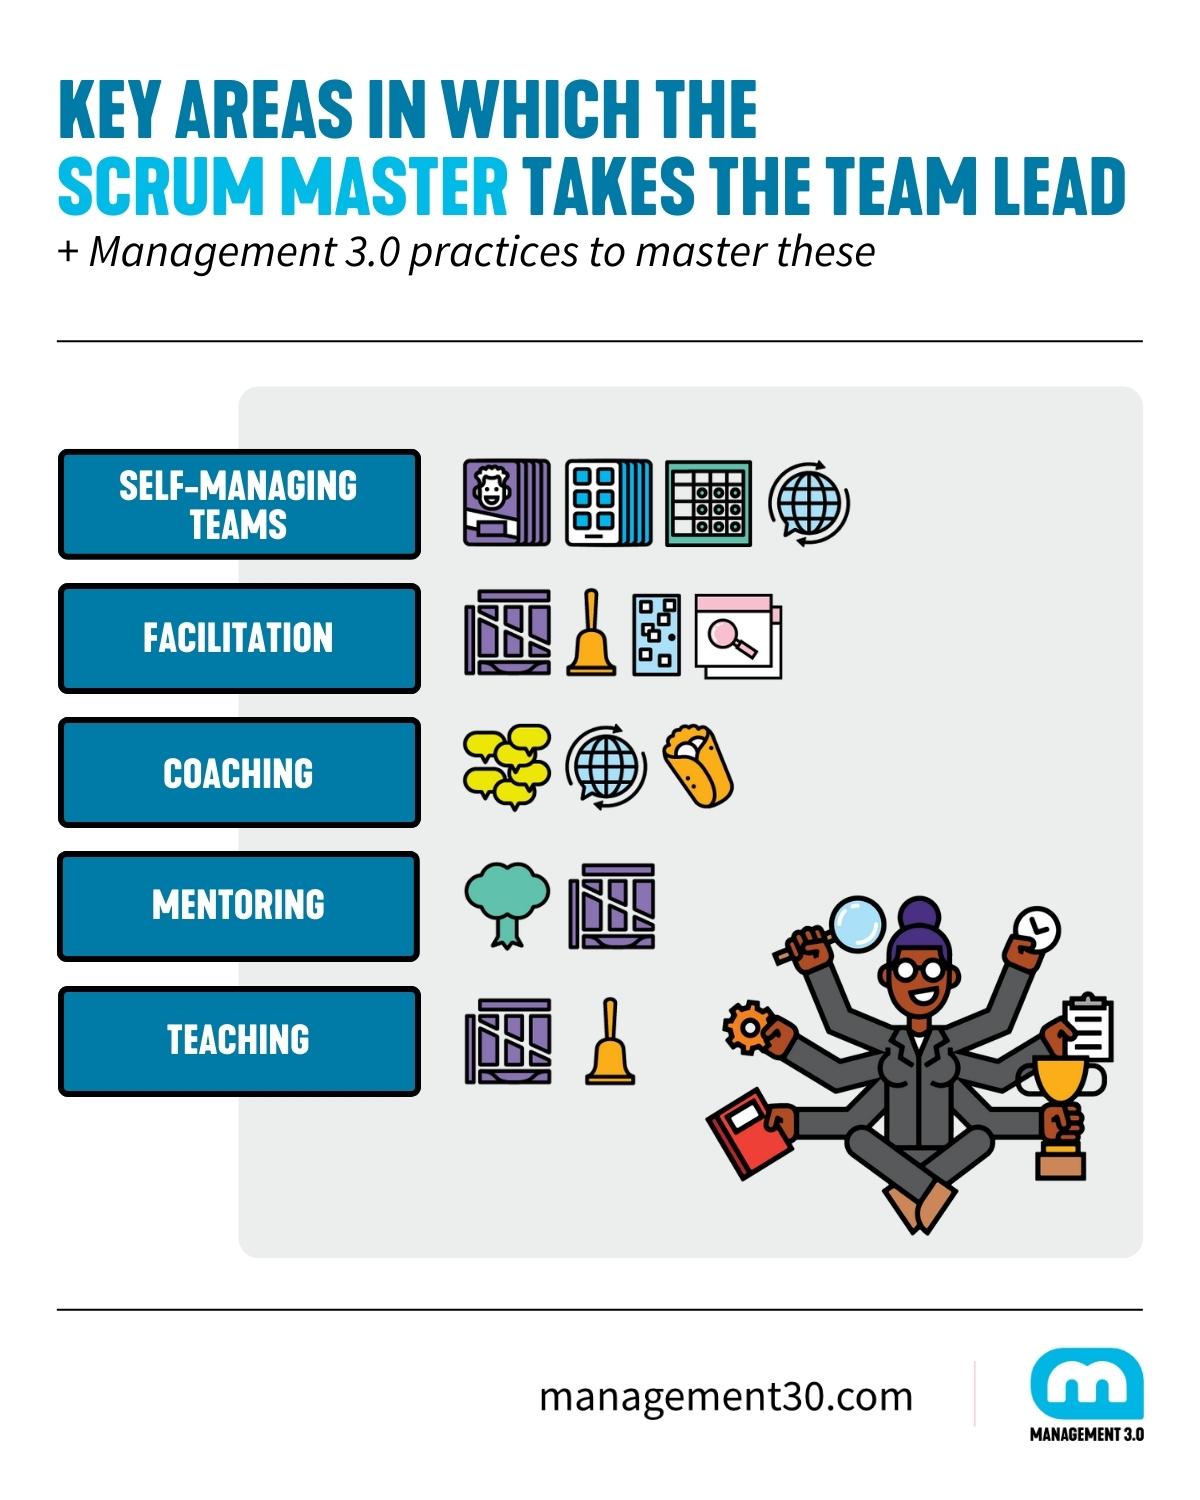 Key Areas in which the Scrum Master takes the Team Lead